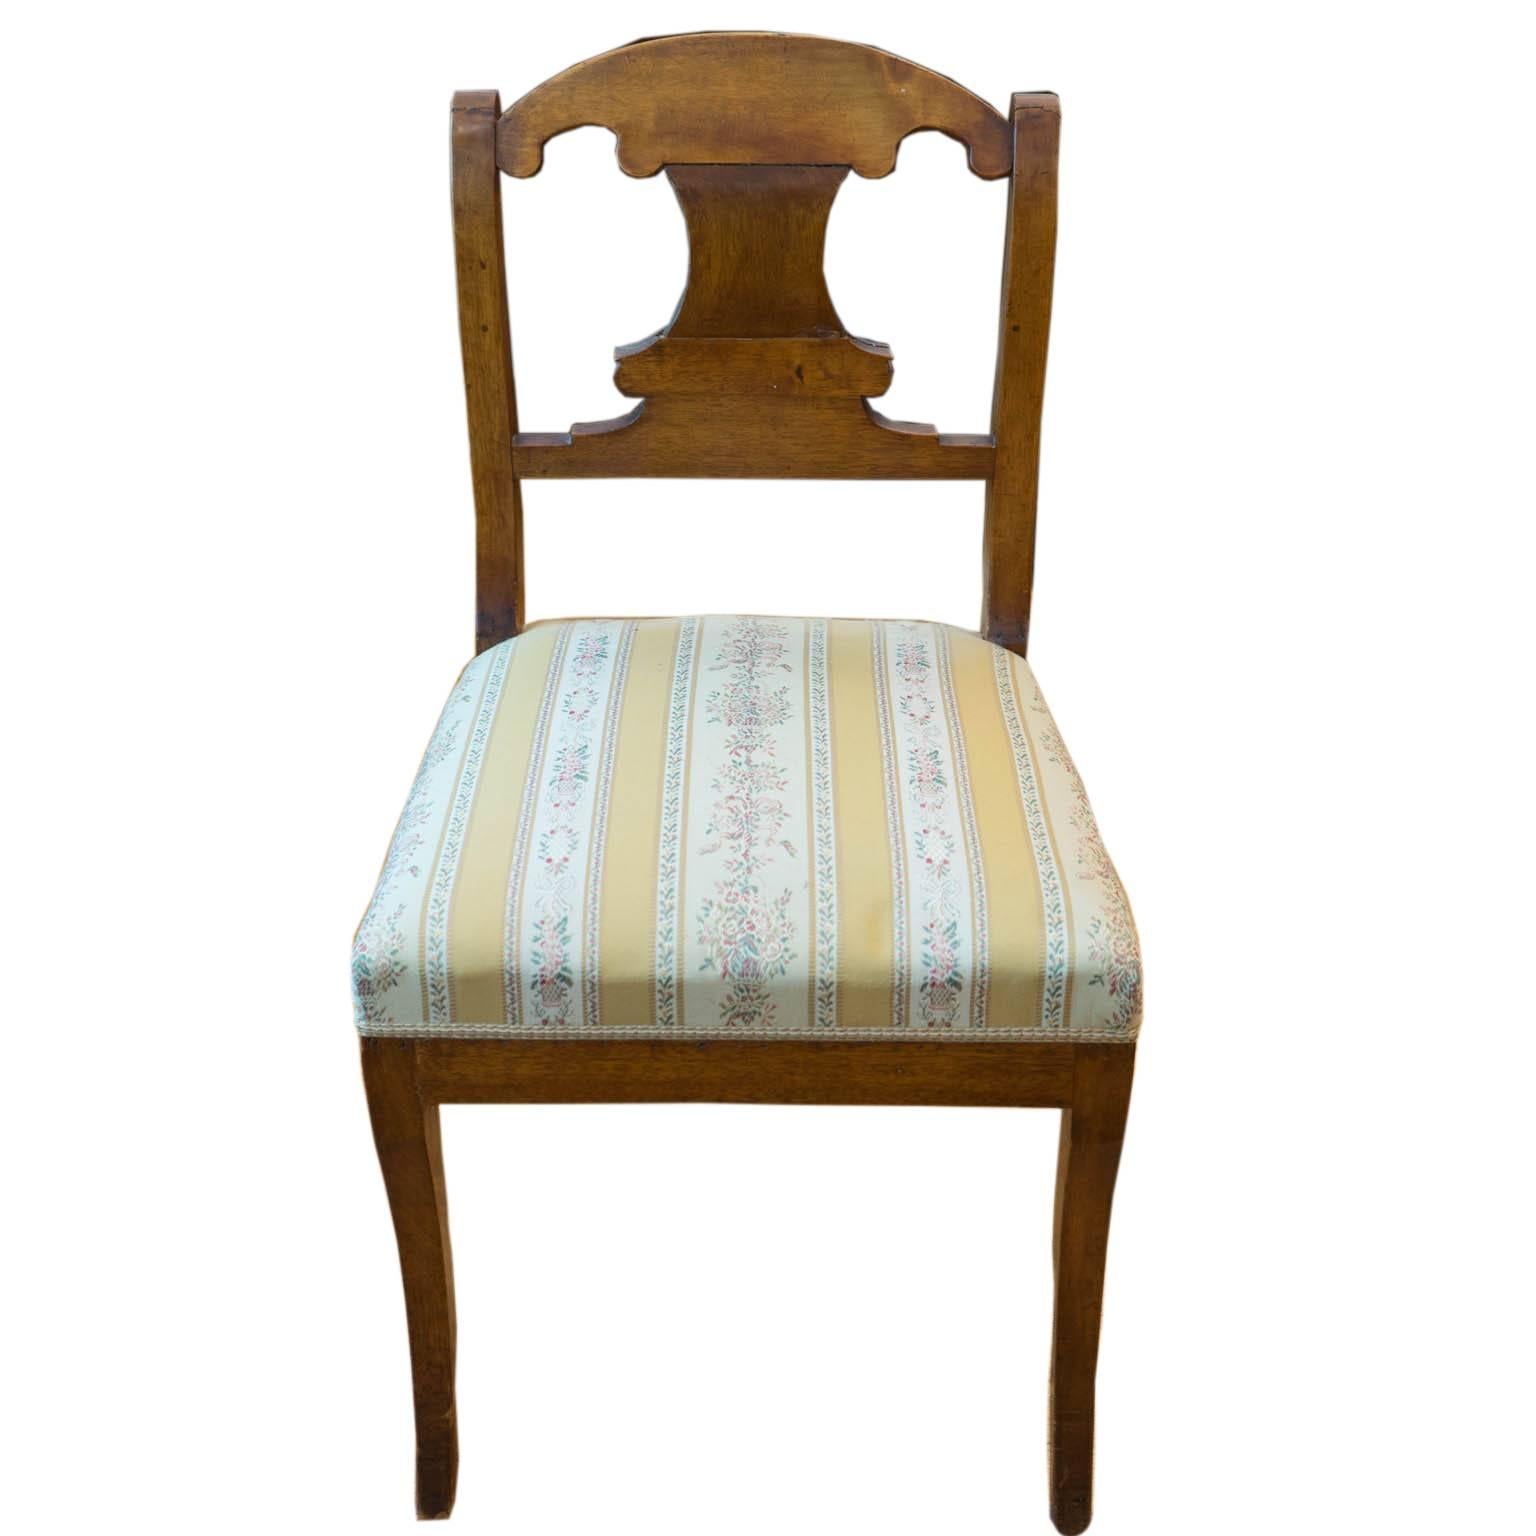 This elegant and sturdy side chair was crafted of solid birch during the reign of King Karl Johan, from whom the period was named. It was reupholstered sometime in its past, perhaps 100 years later, in period appropriate Swedish fabric.